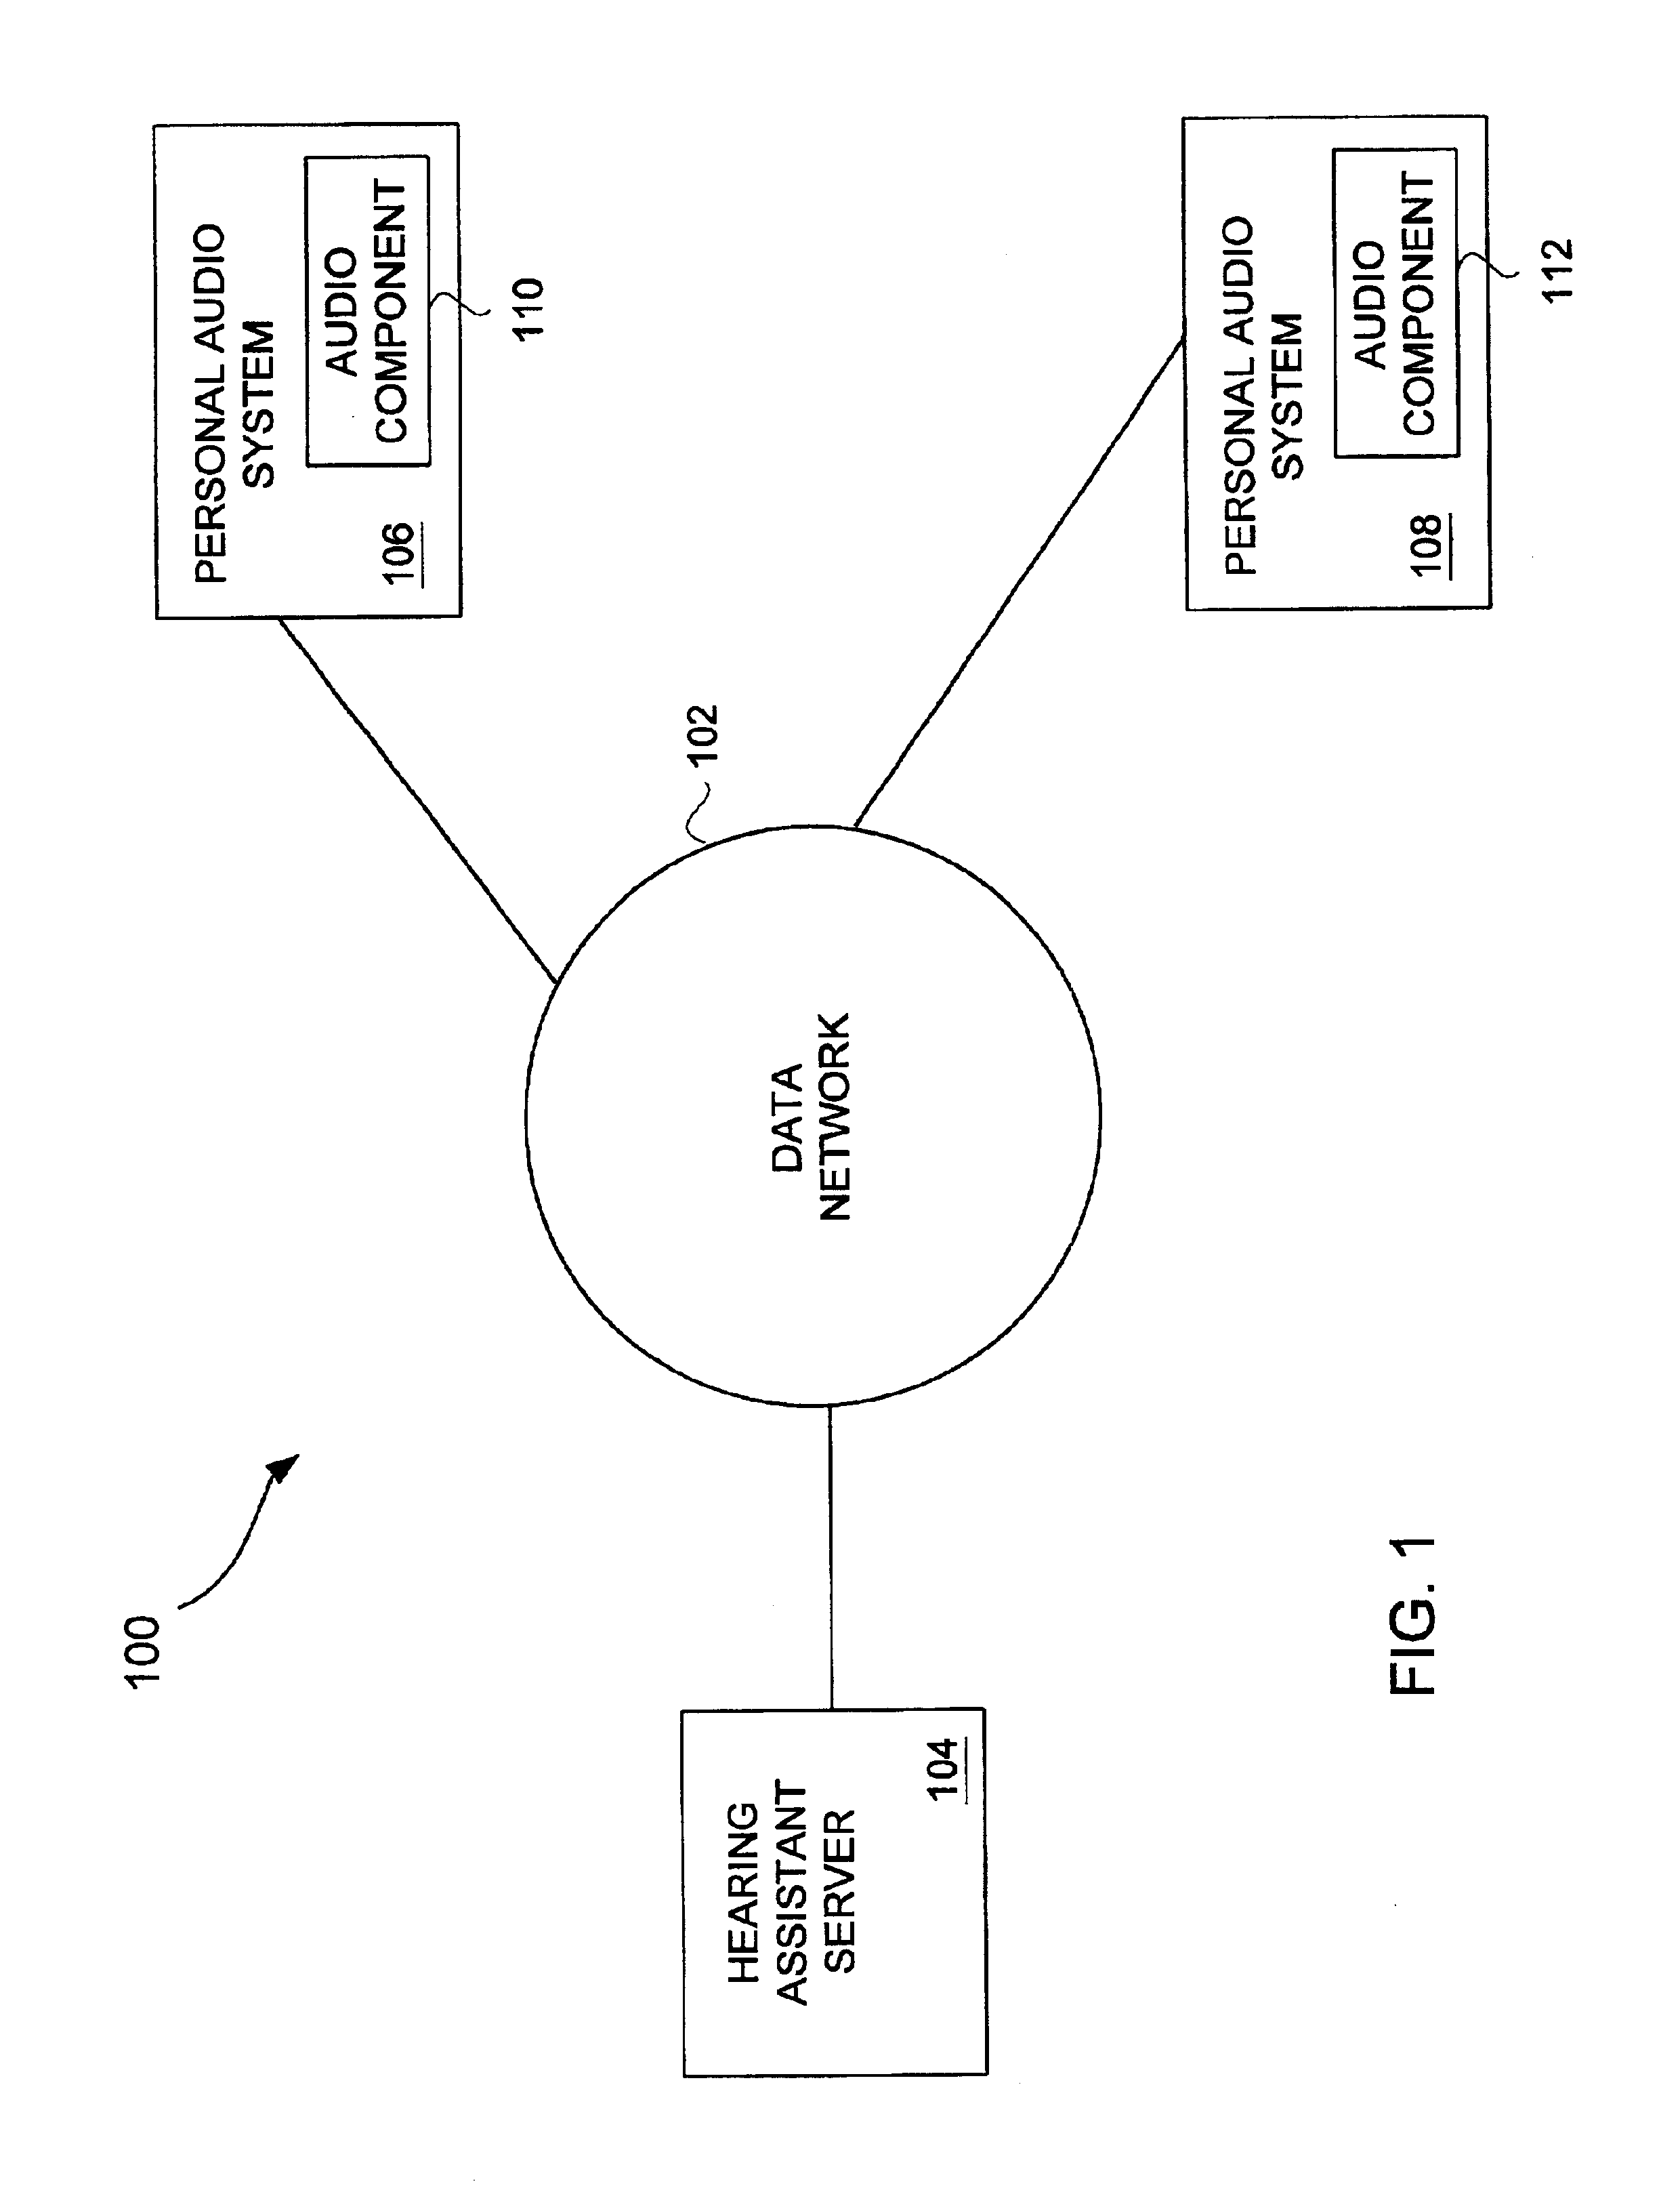 Method for customizing audio systems for hearing impaired